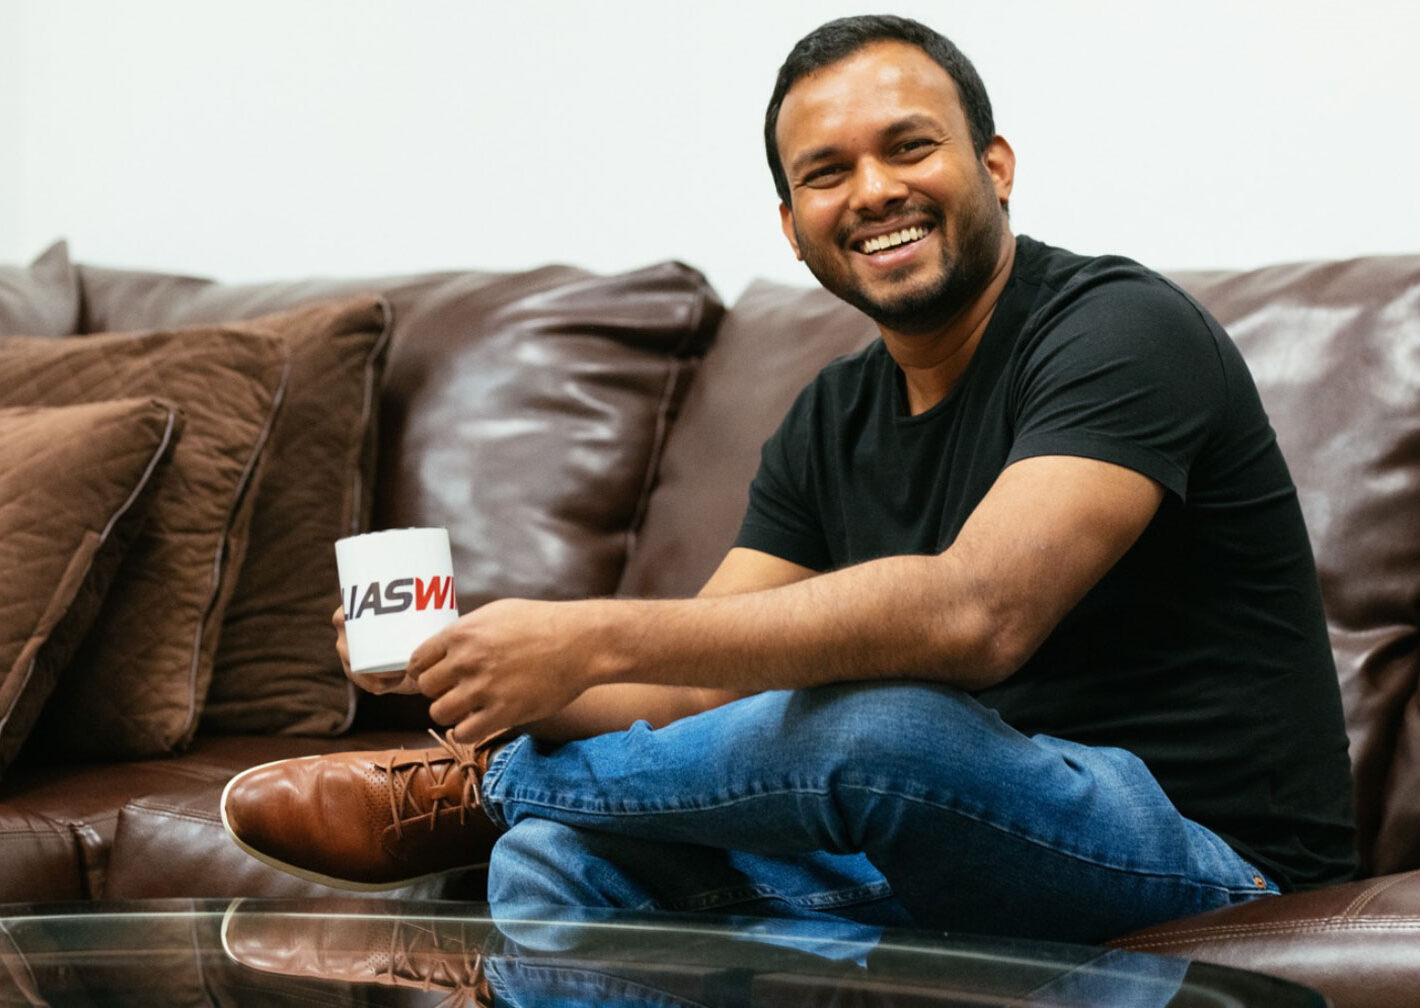 Man with coffee mug smiling sitting on a couch